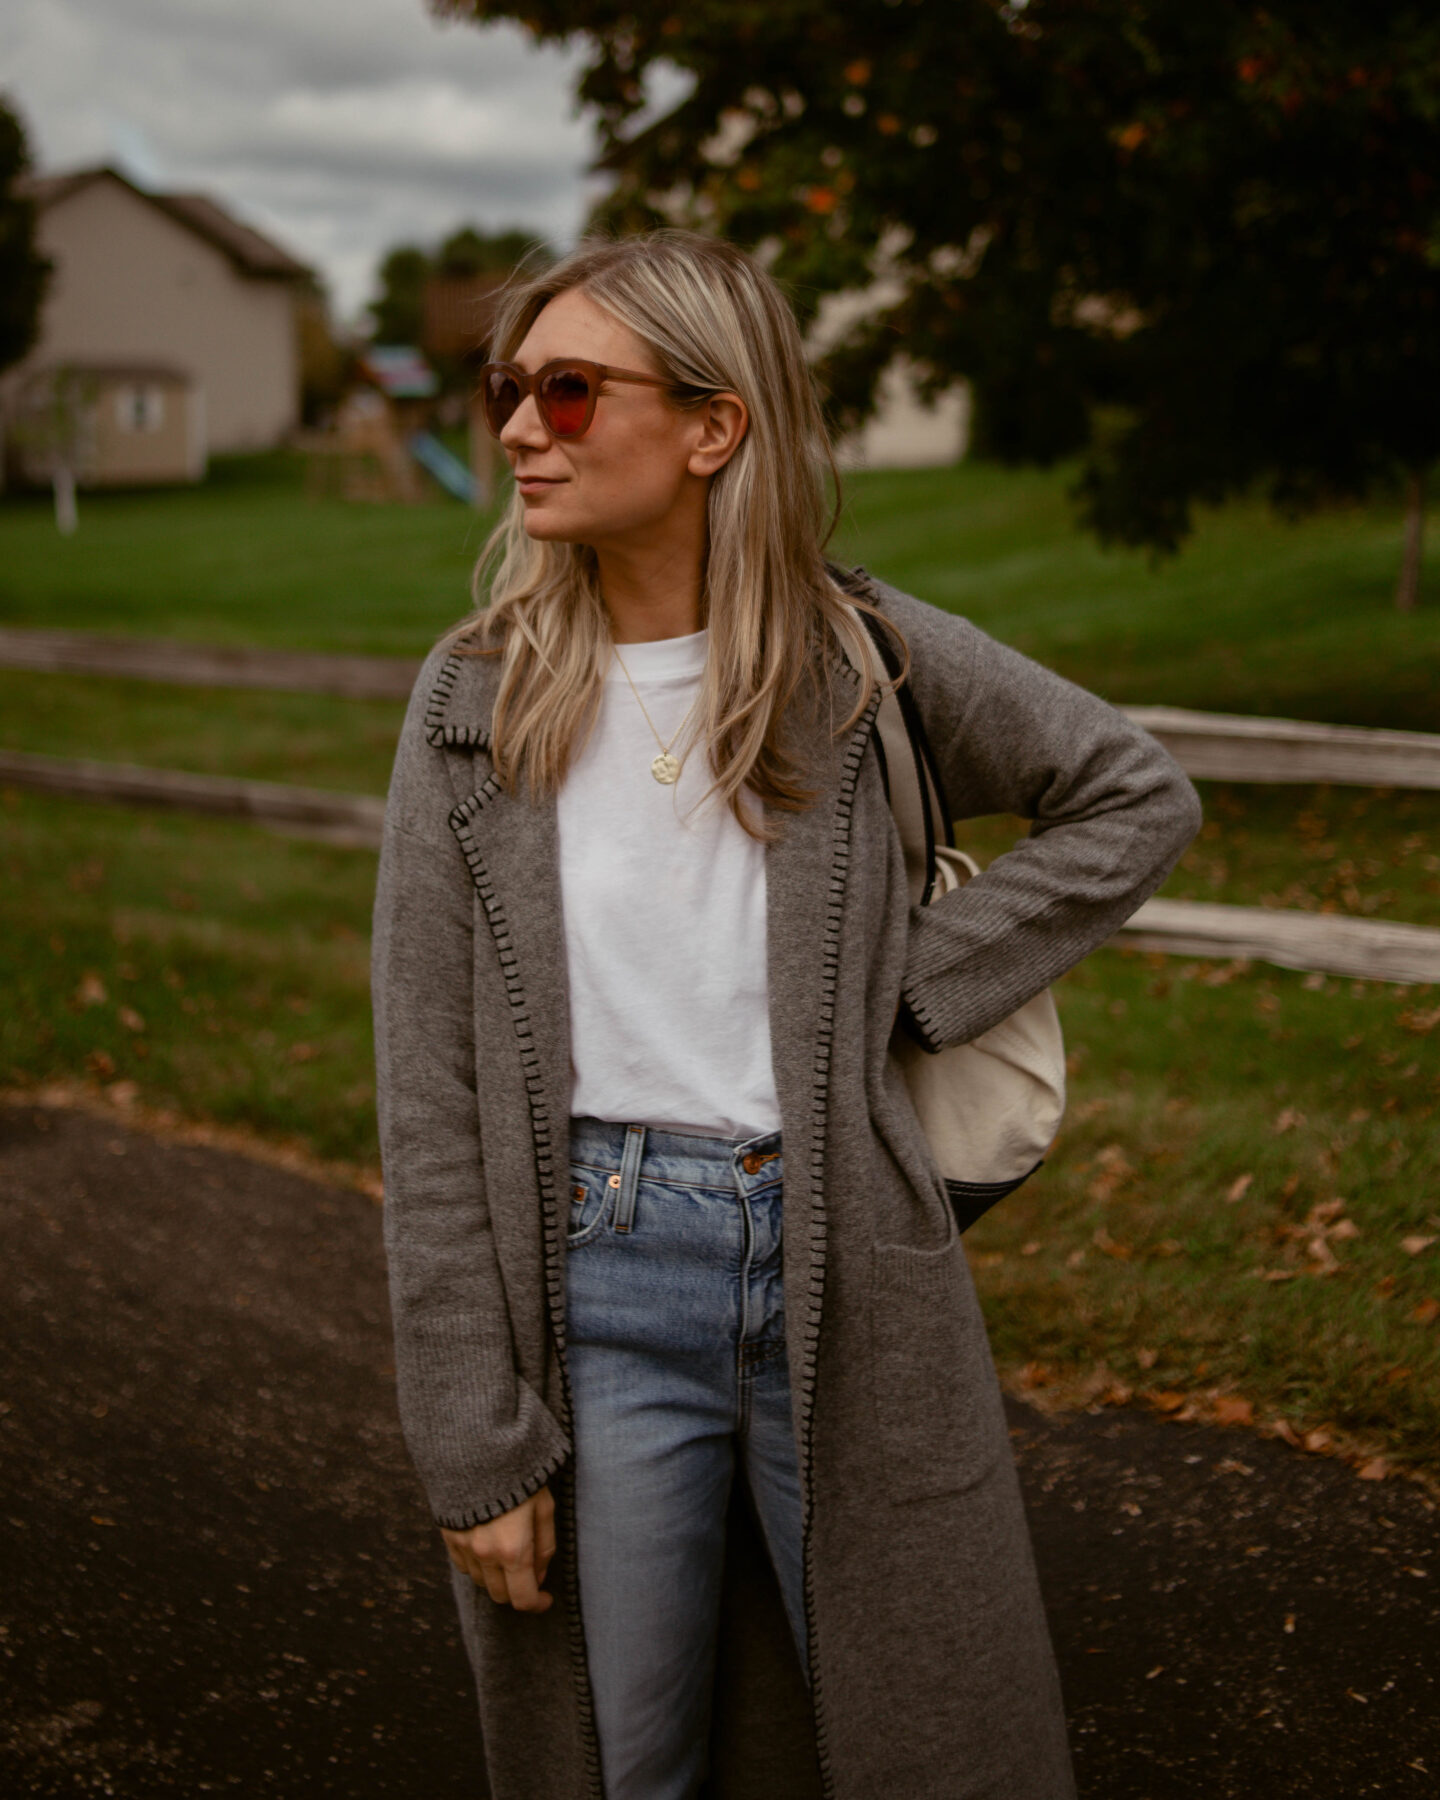 Karin Emily wears a relaxed pair of jeans and an oversized white tee under a gray maxi cardigan